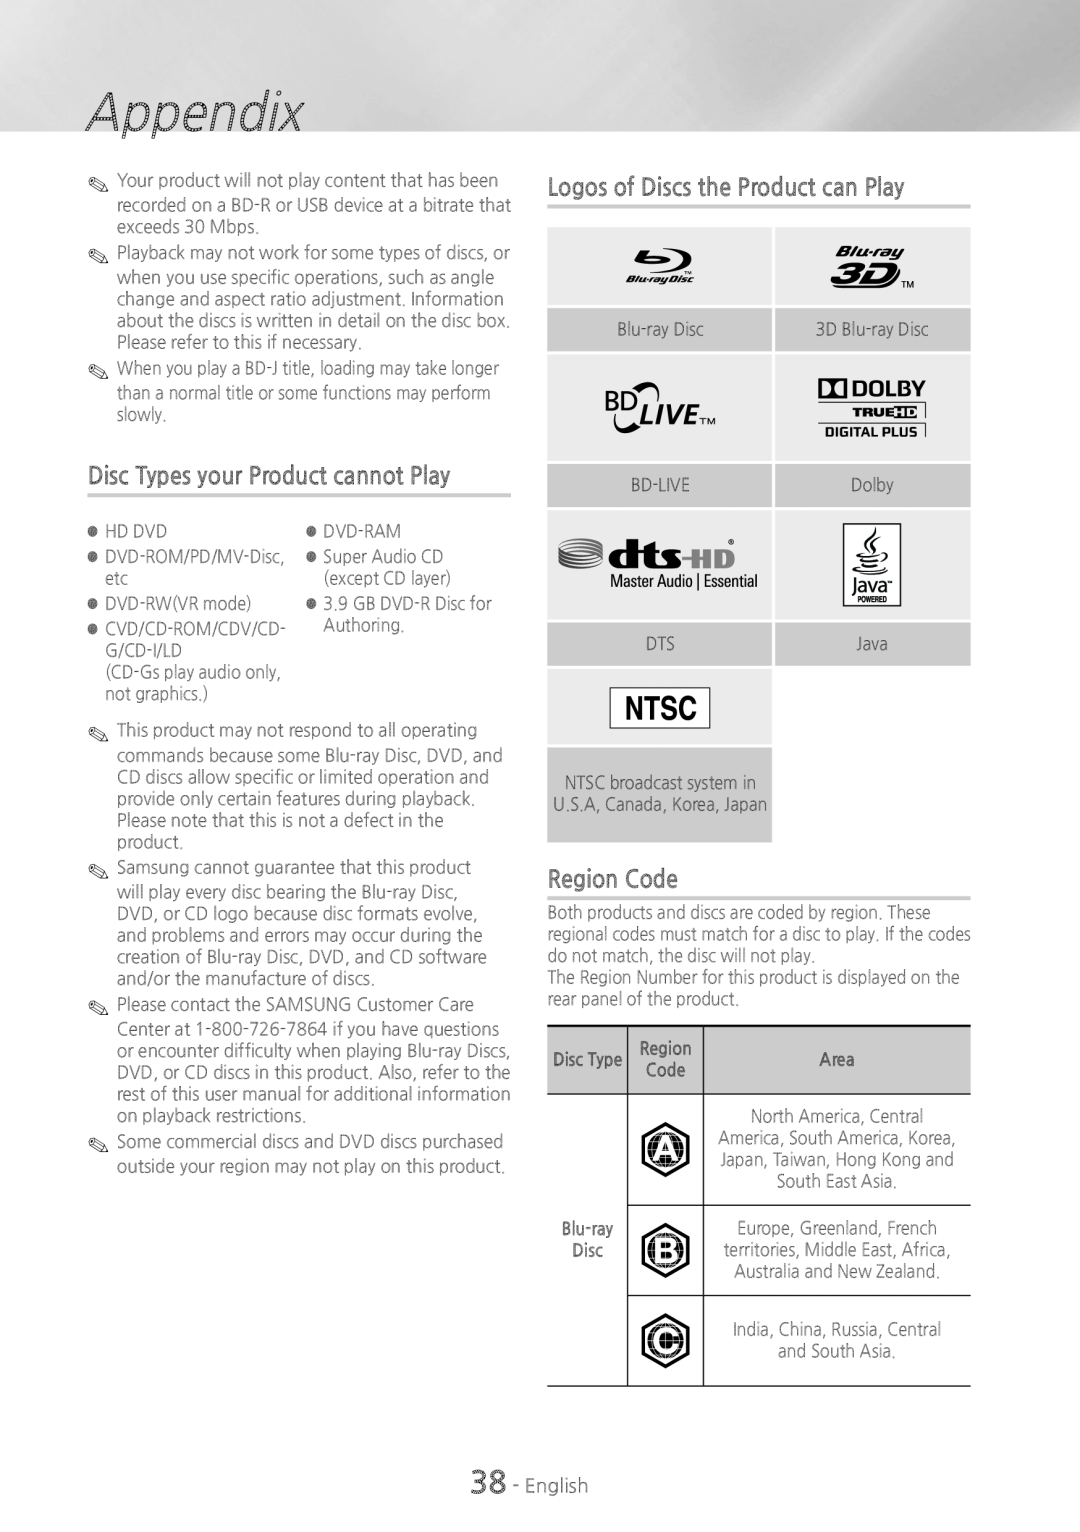 Samsung HTH5500 user manual Disc Types your Product cannot Play, Logos of Discs the Product can Play, Region Code, Appendix 